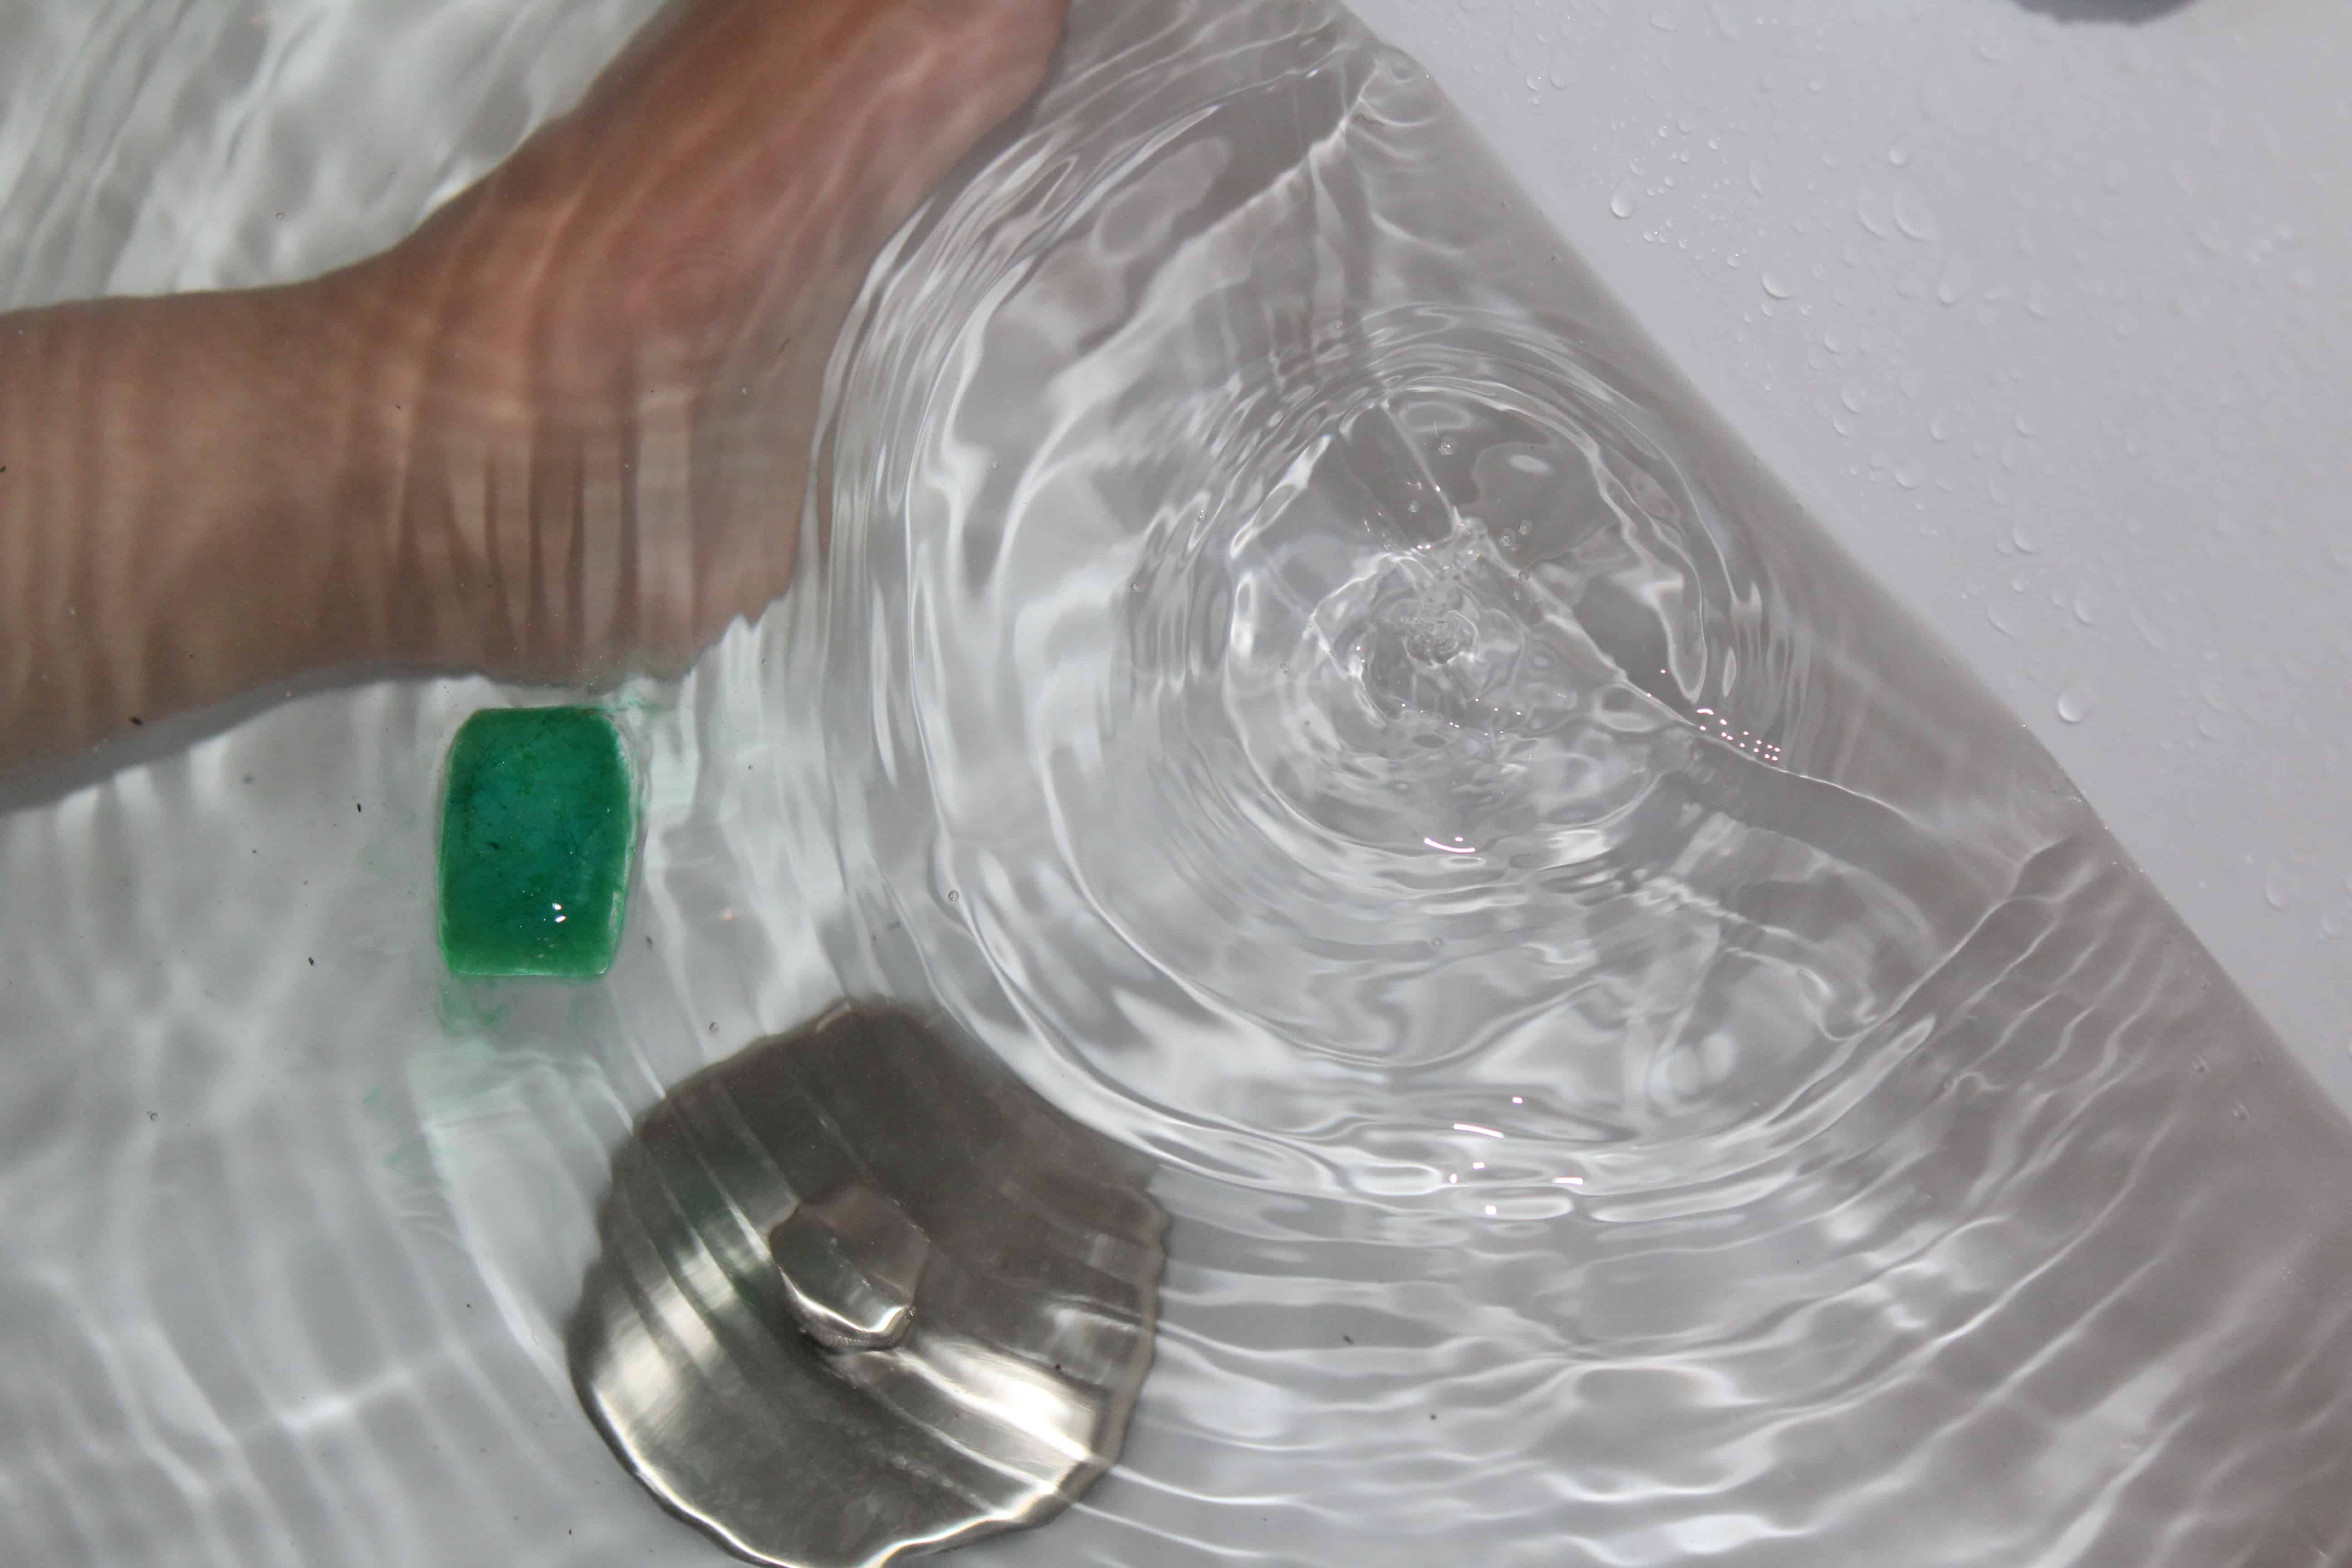 Toddler foot and green Ice cube in bathwater